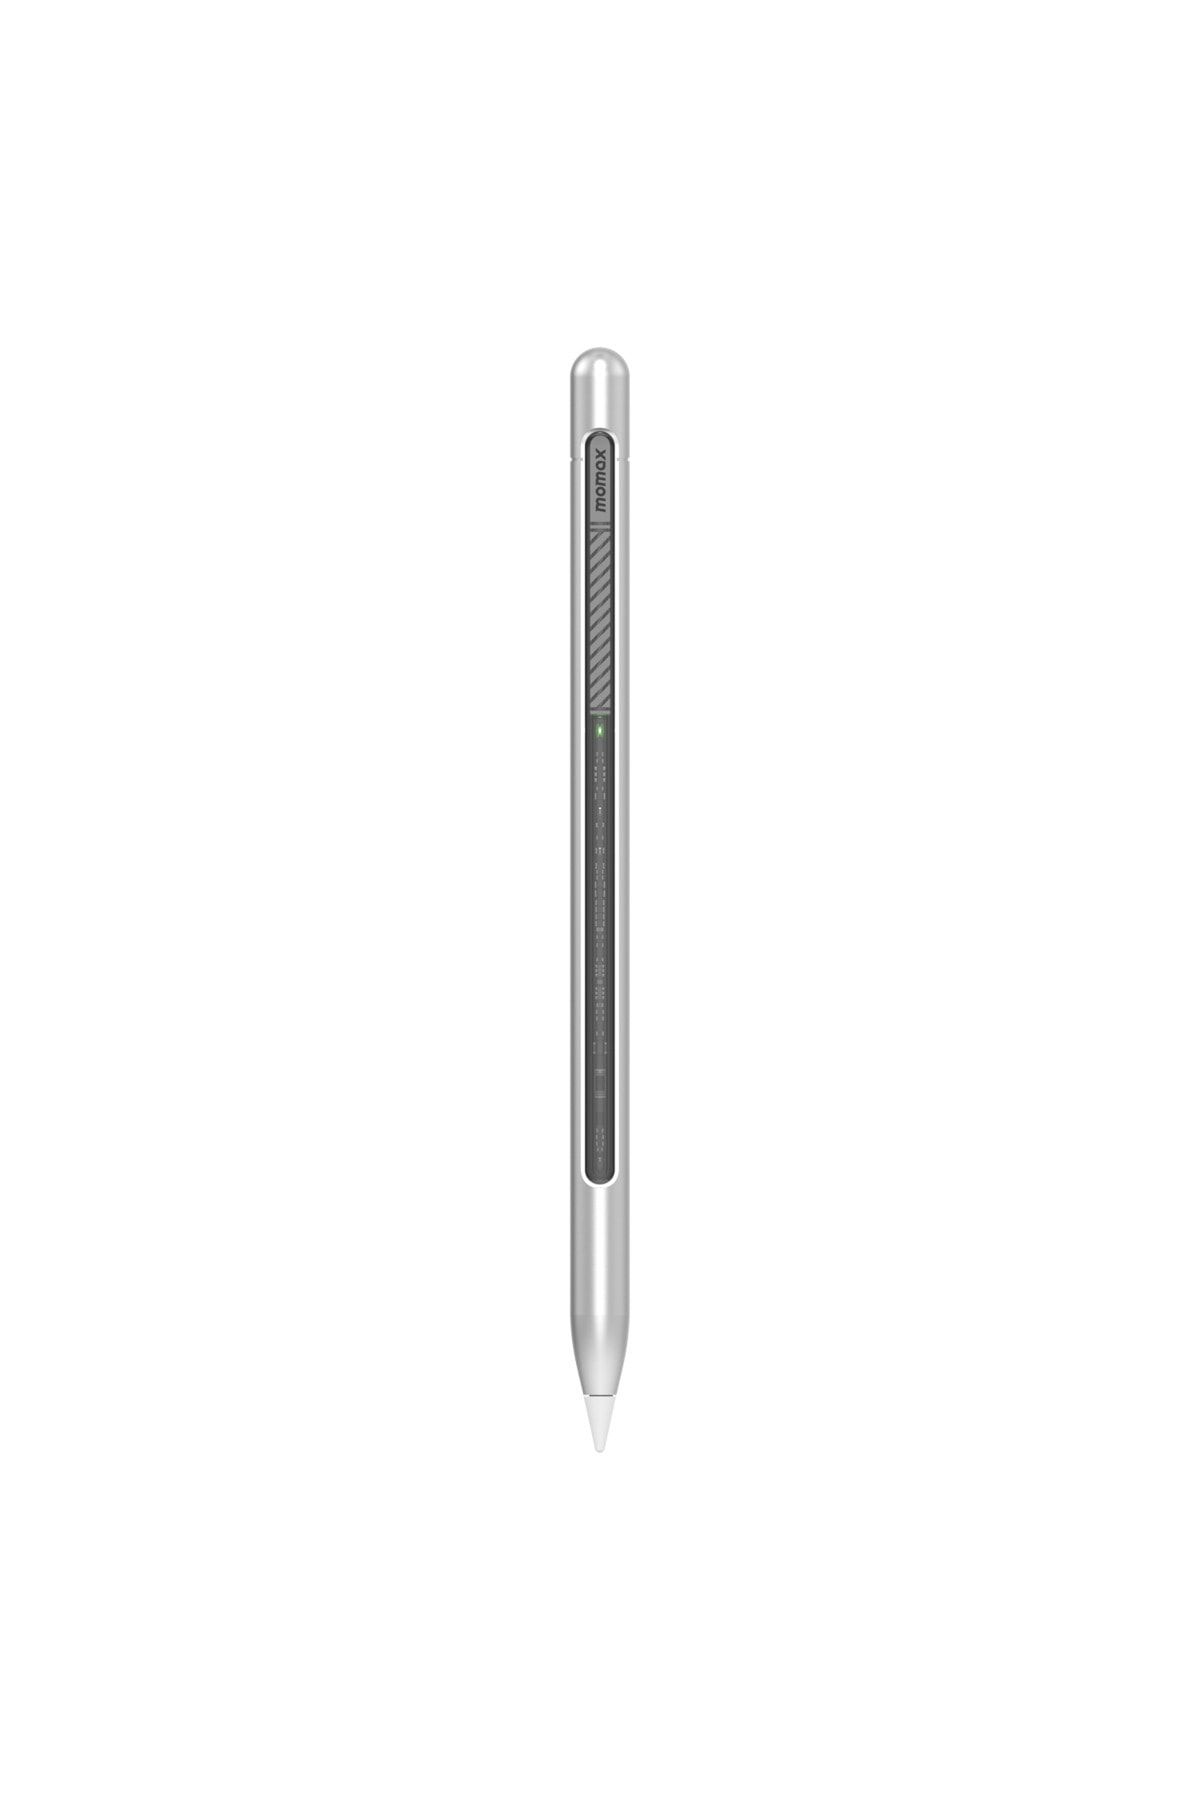 Momax Mag.lik Pro Magnetic Charging Active Stylus Pen